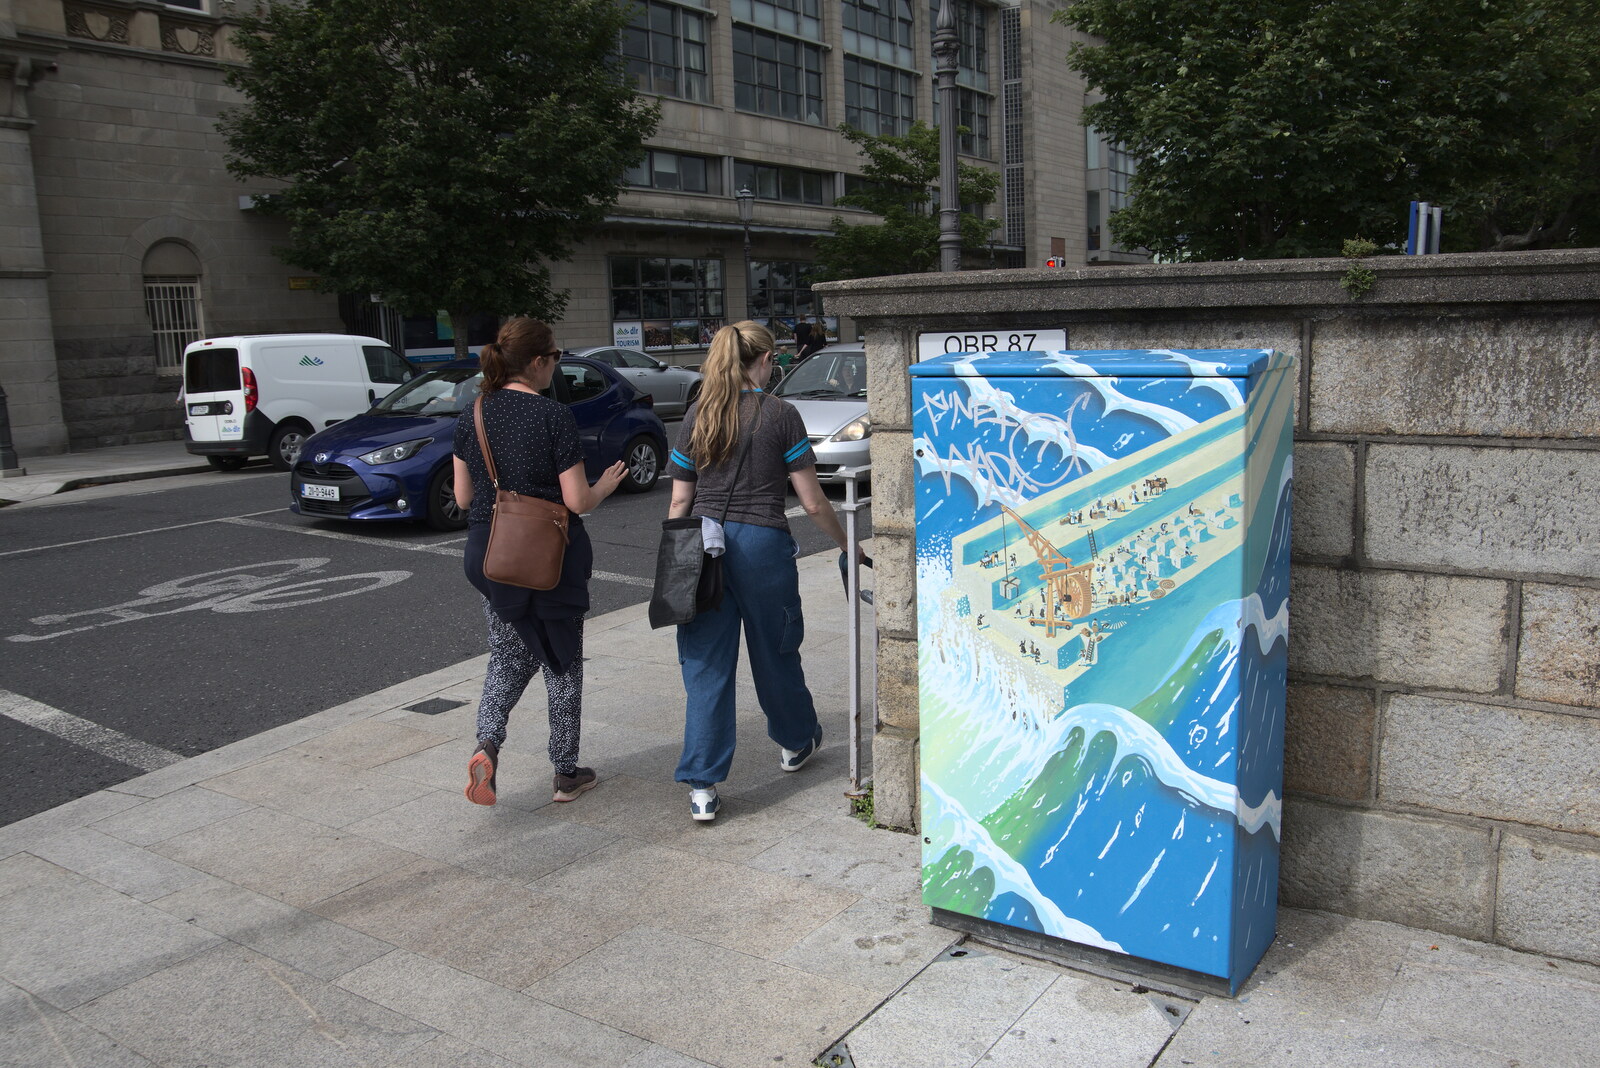 Another painted control box from Manorhamilton and the Street Art of Dún Laoghaire, Ireland - 15th August 2021